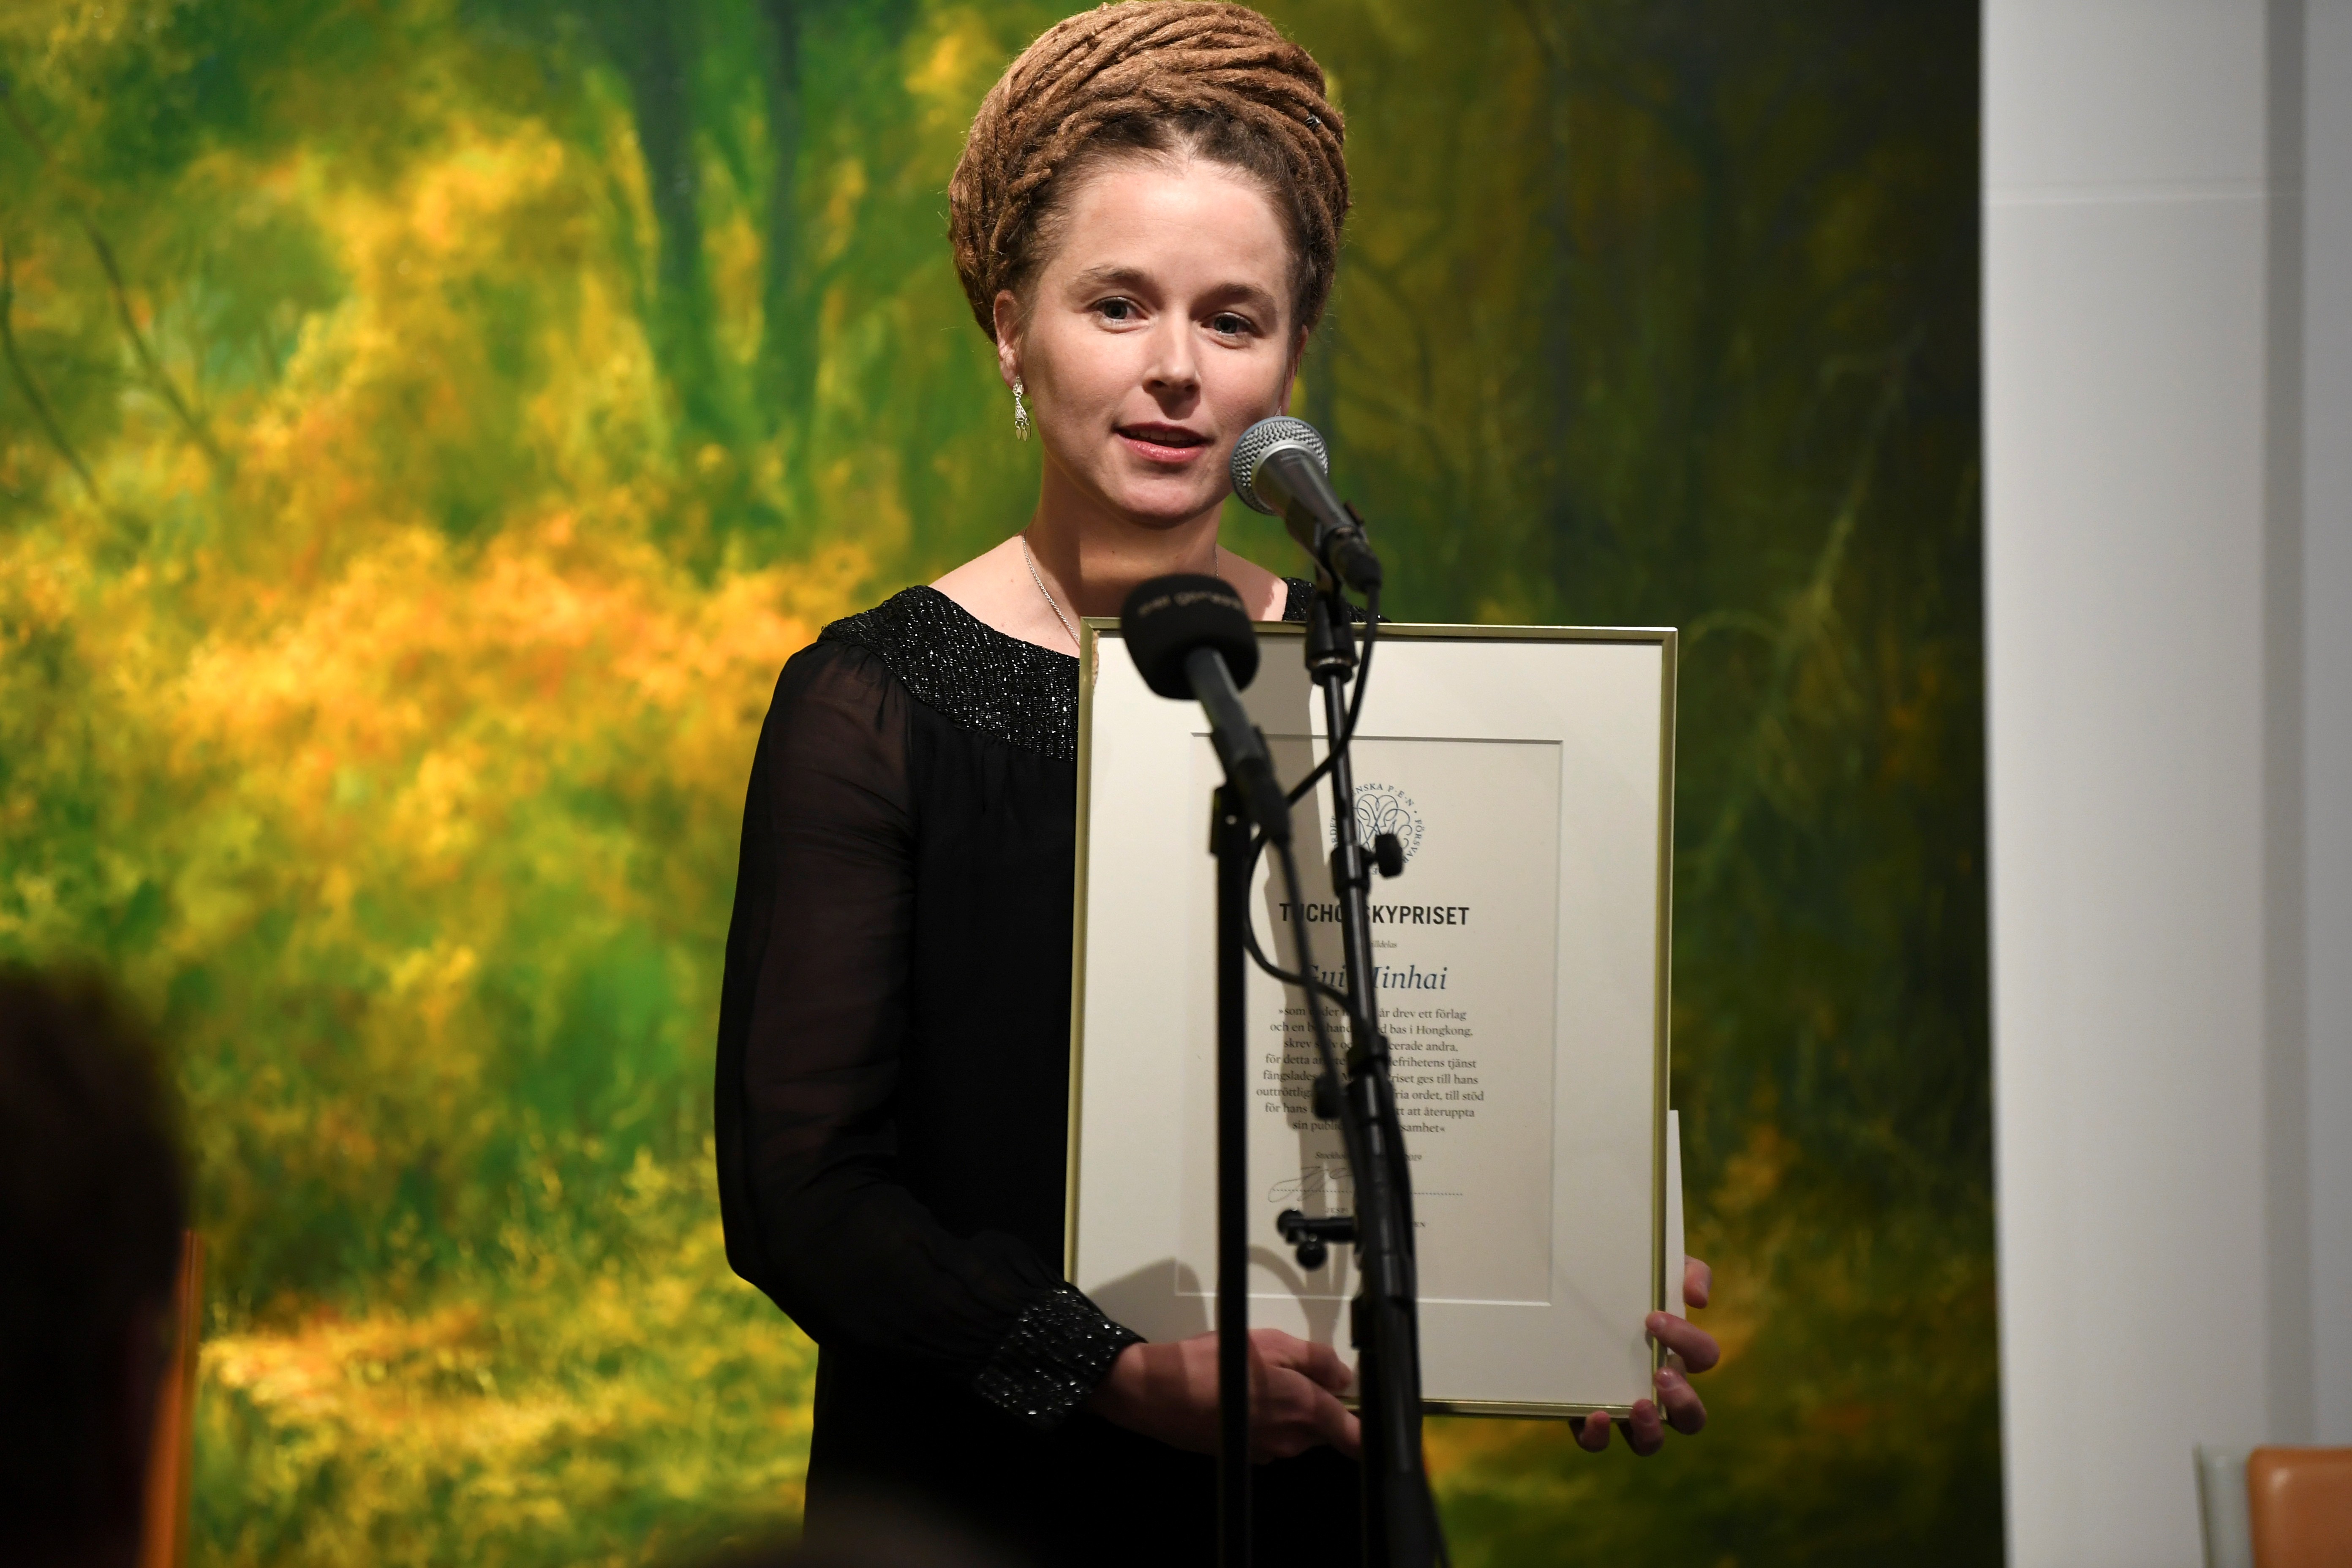 Swedish Minister for Culture and Democracy Amanda Lind presents the Tucholsky Prize to detained bookseller Gui Minhai in Stockholm on November 15. Photo: Reuters